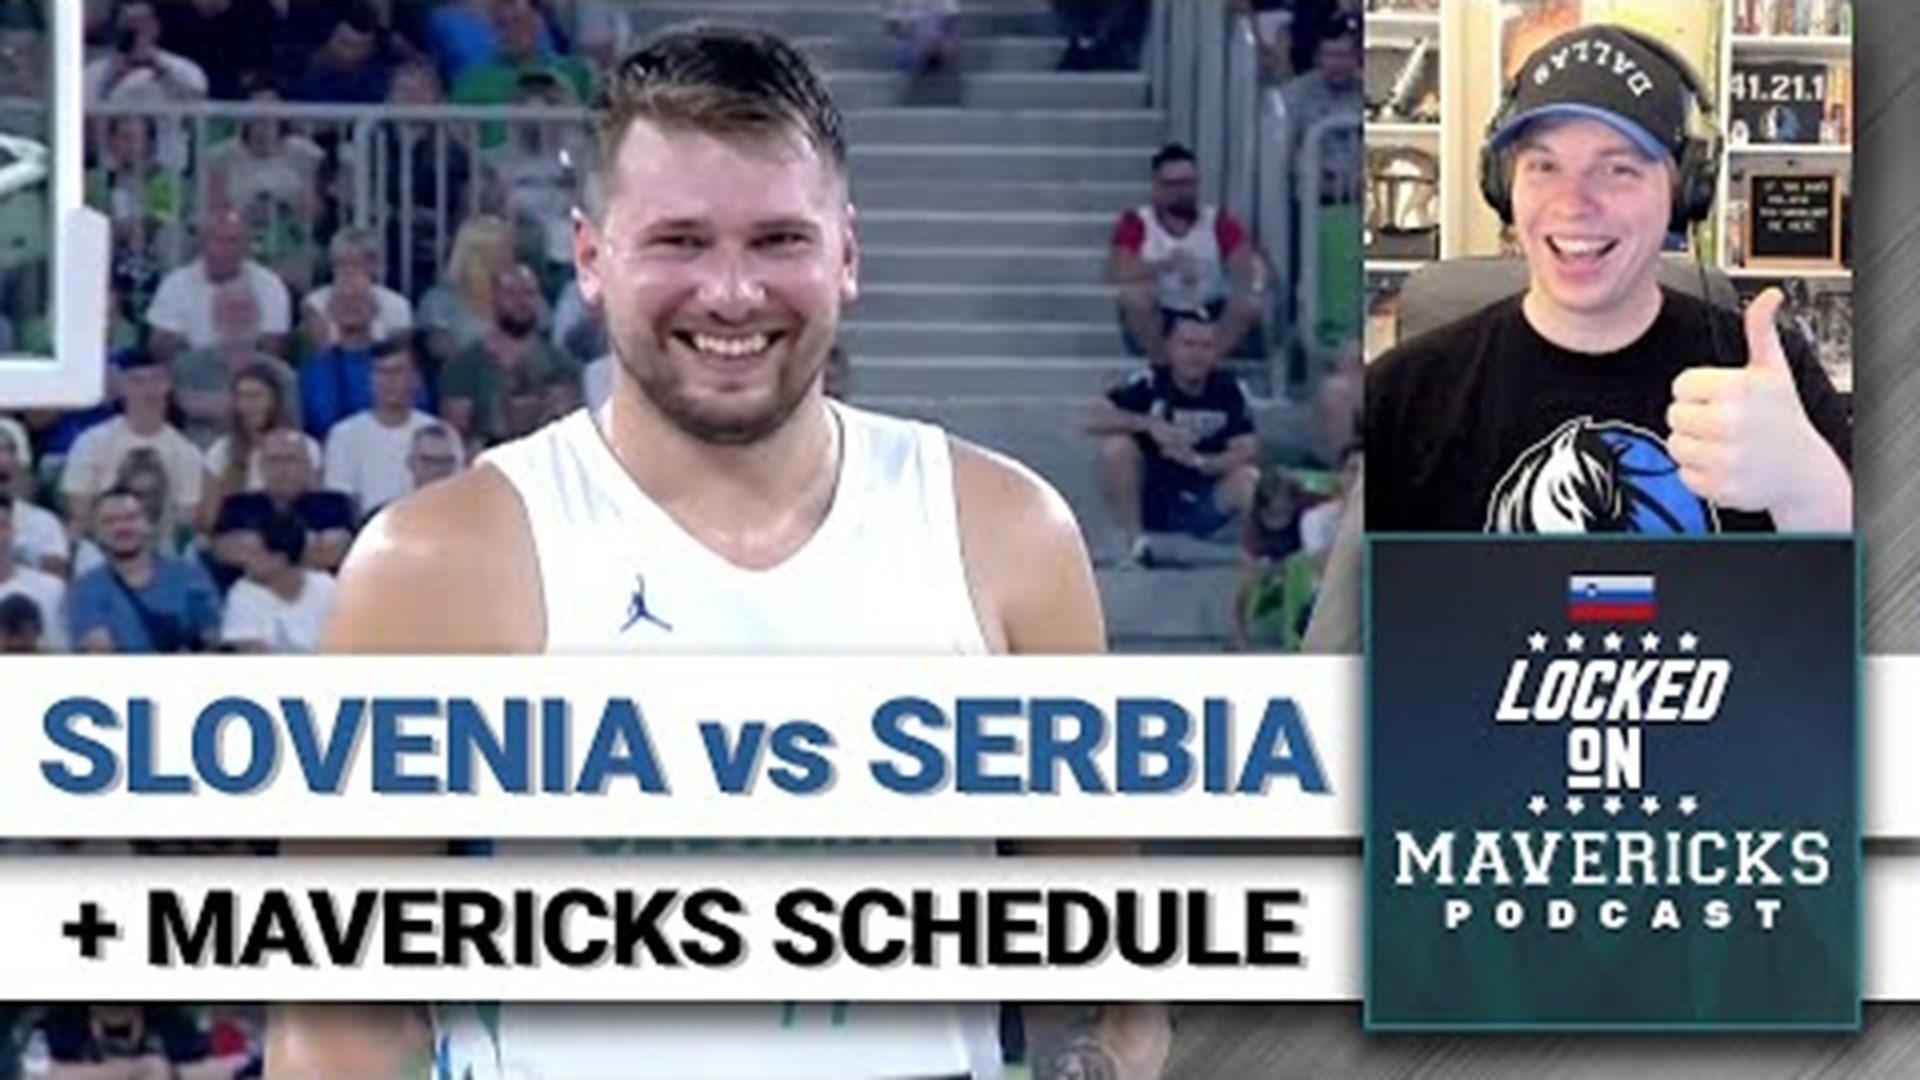 Luka Doncic & Slovenia faced off against Nikola Jokic & Serbia in an exhibition before Eurobasket. Then the NBA released the Dallas Mavericks schedule.